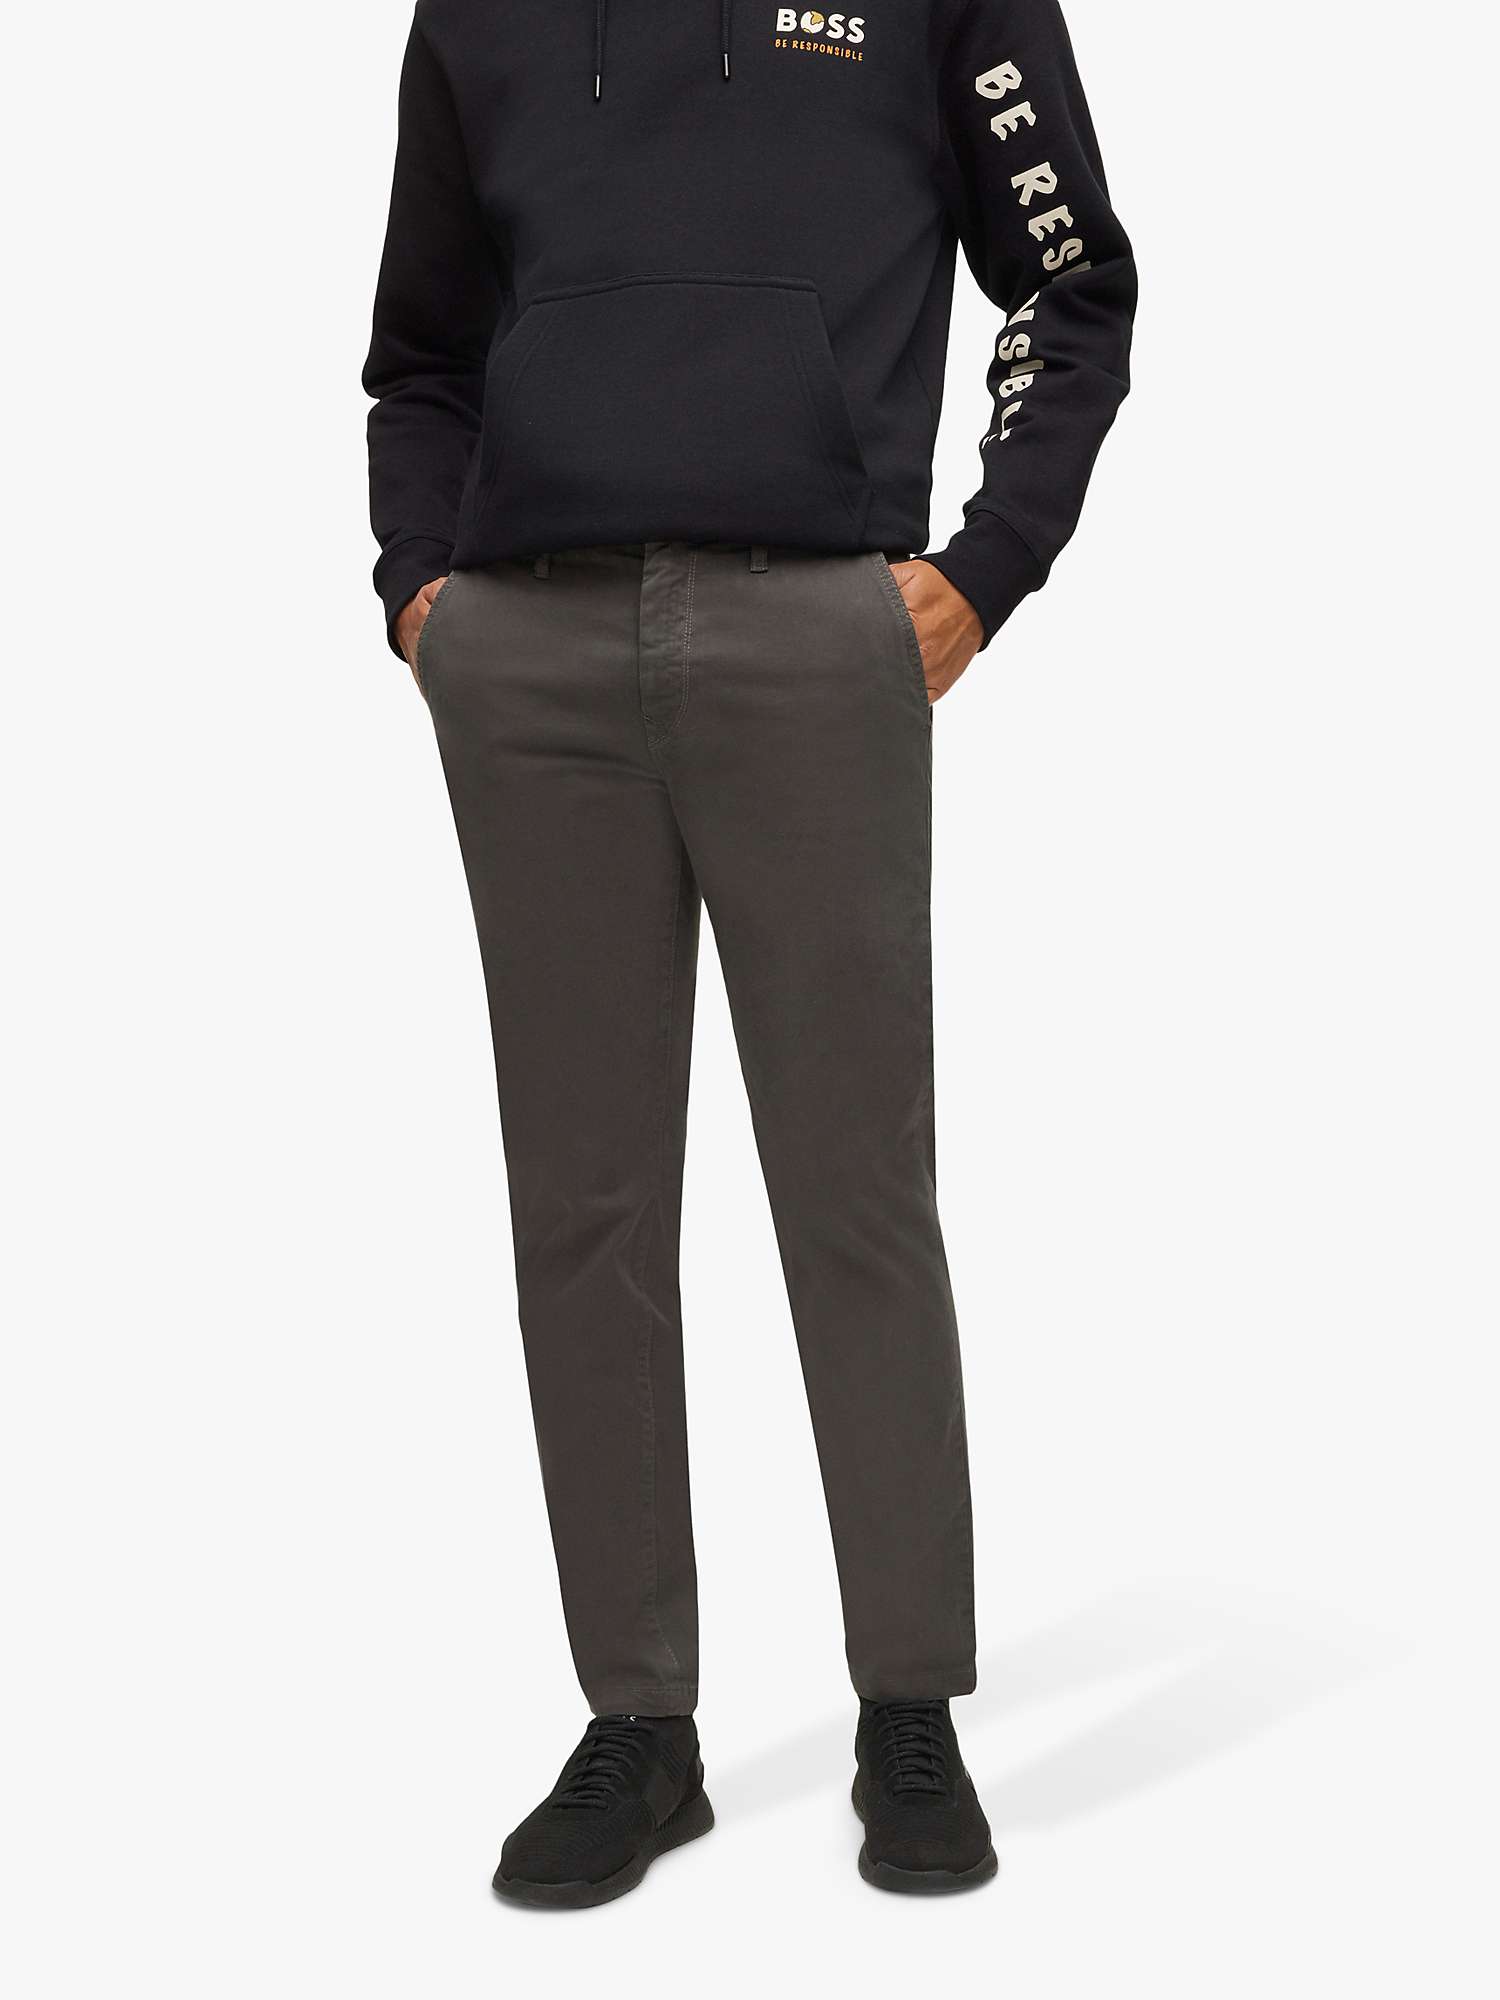 Buy BOSS Schino Taber Slim Chinos, Charcoal Online at johnlewis.com